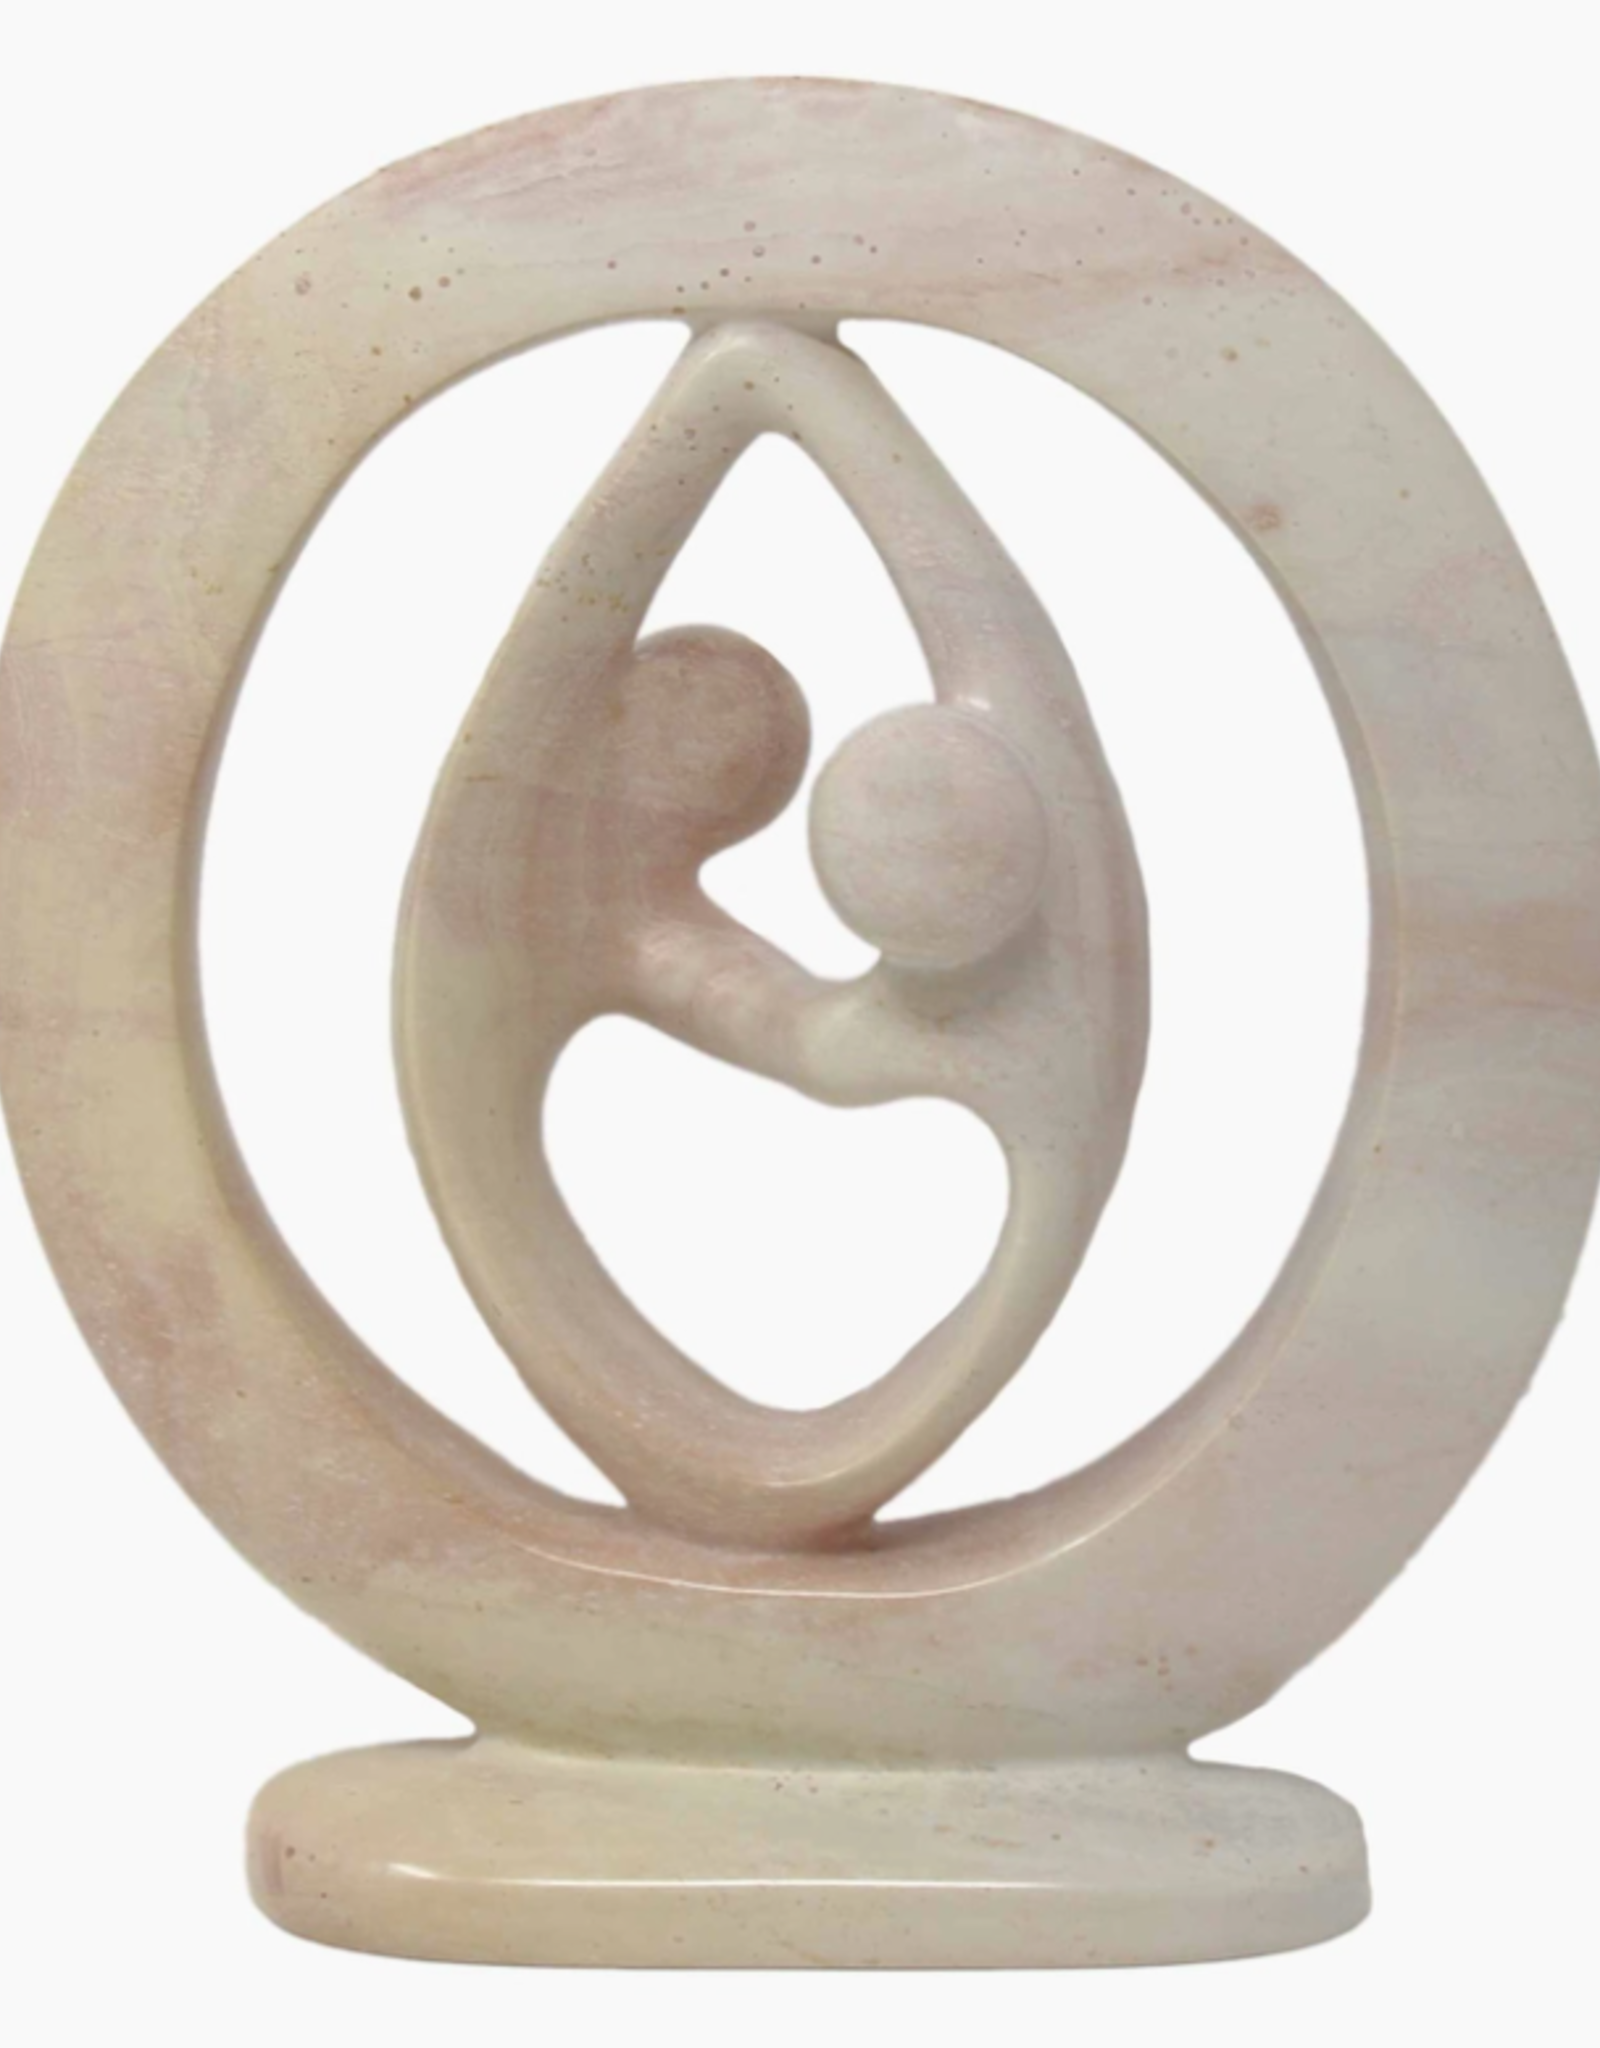 Global Crafts Lover's Embrace Natural Stone Sculpture - 8"